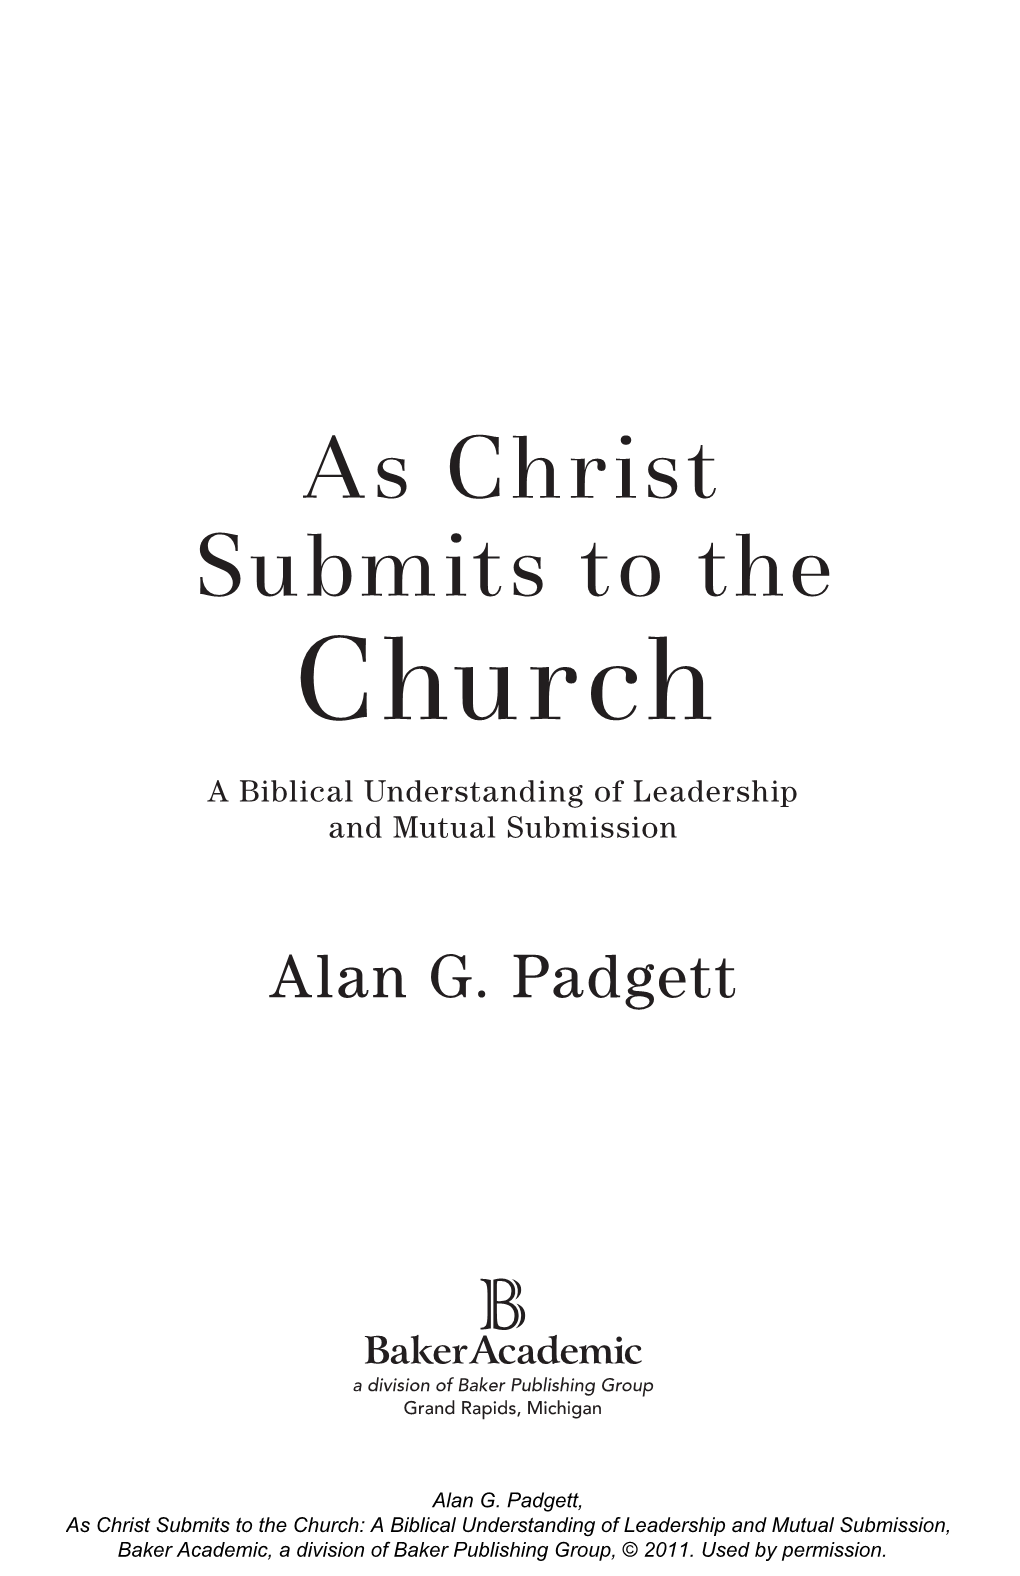 Church a Biblical Understanding of Leadership and Mutual Submission